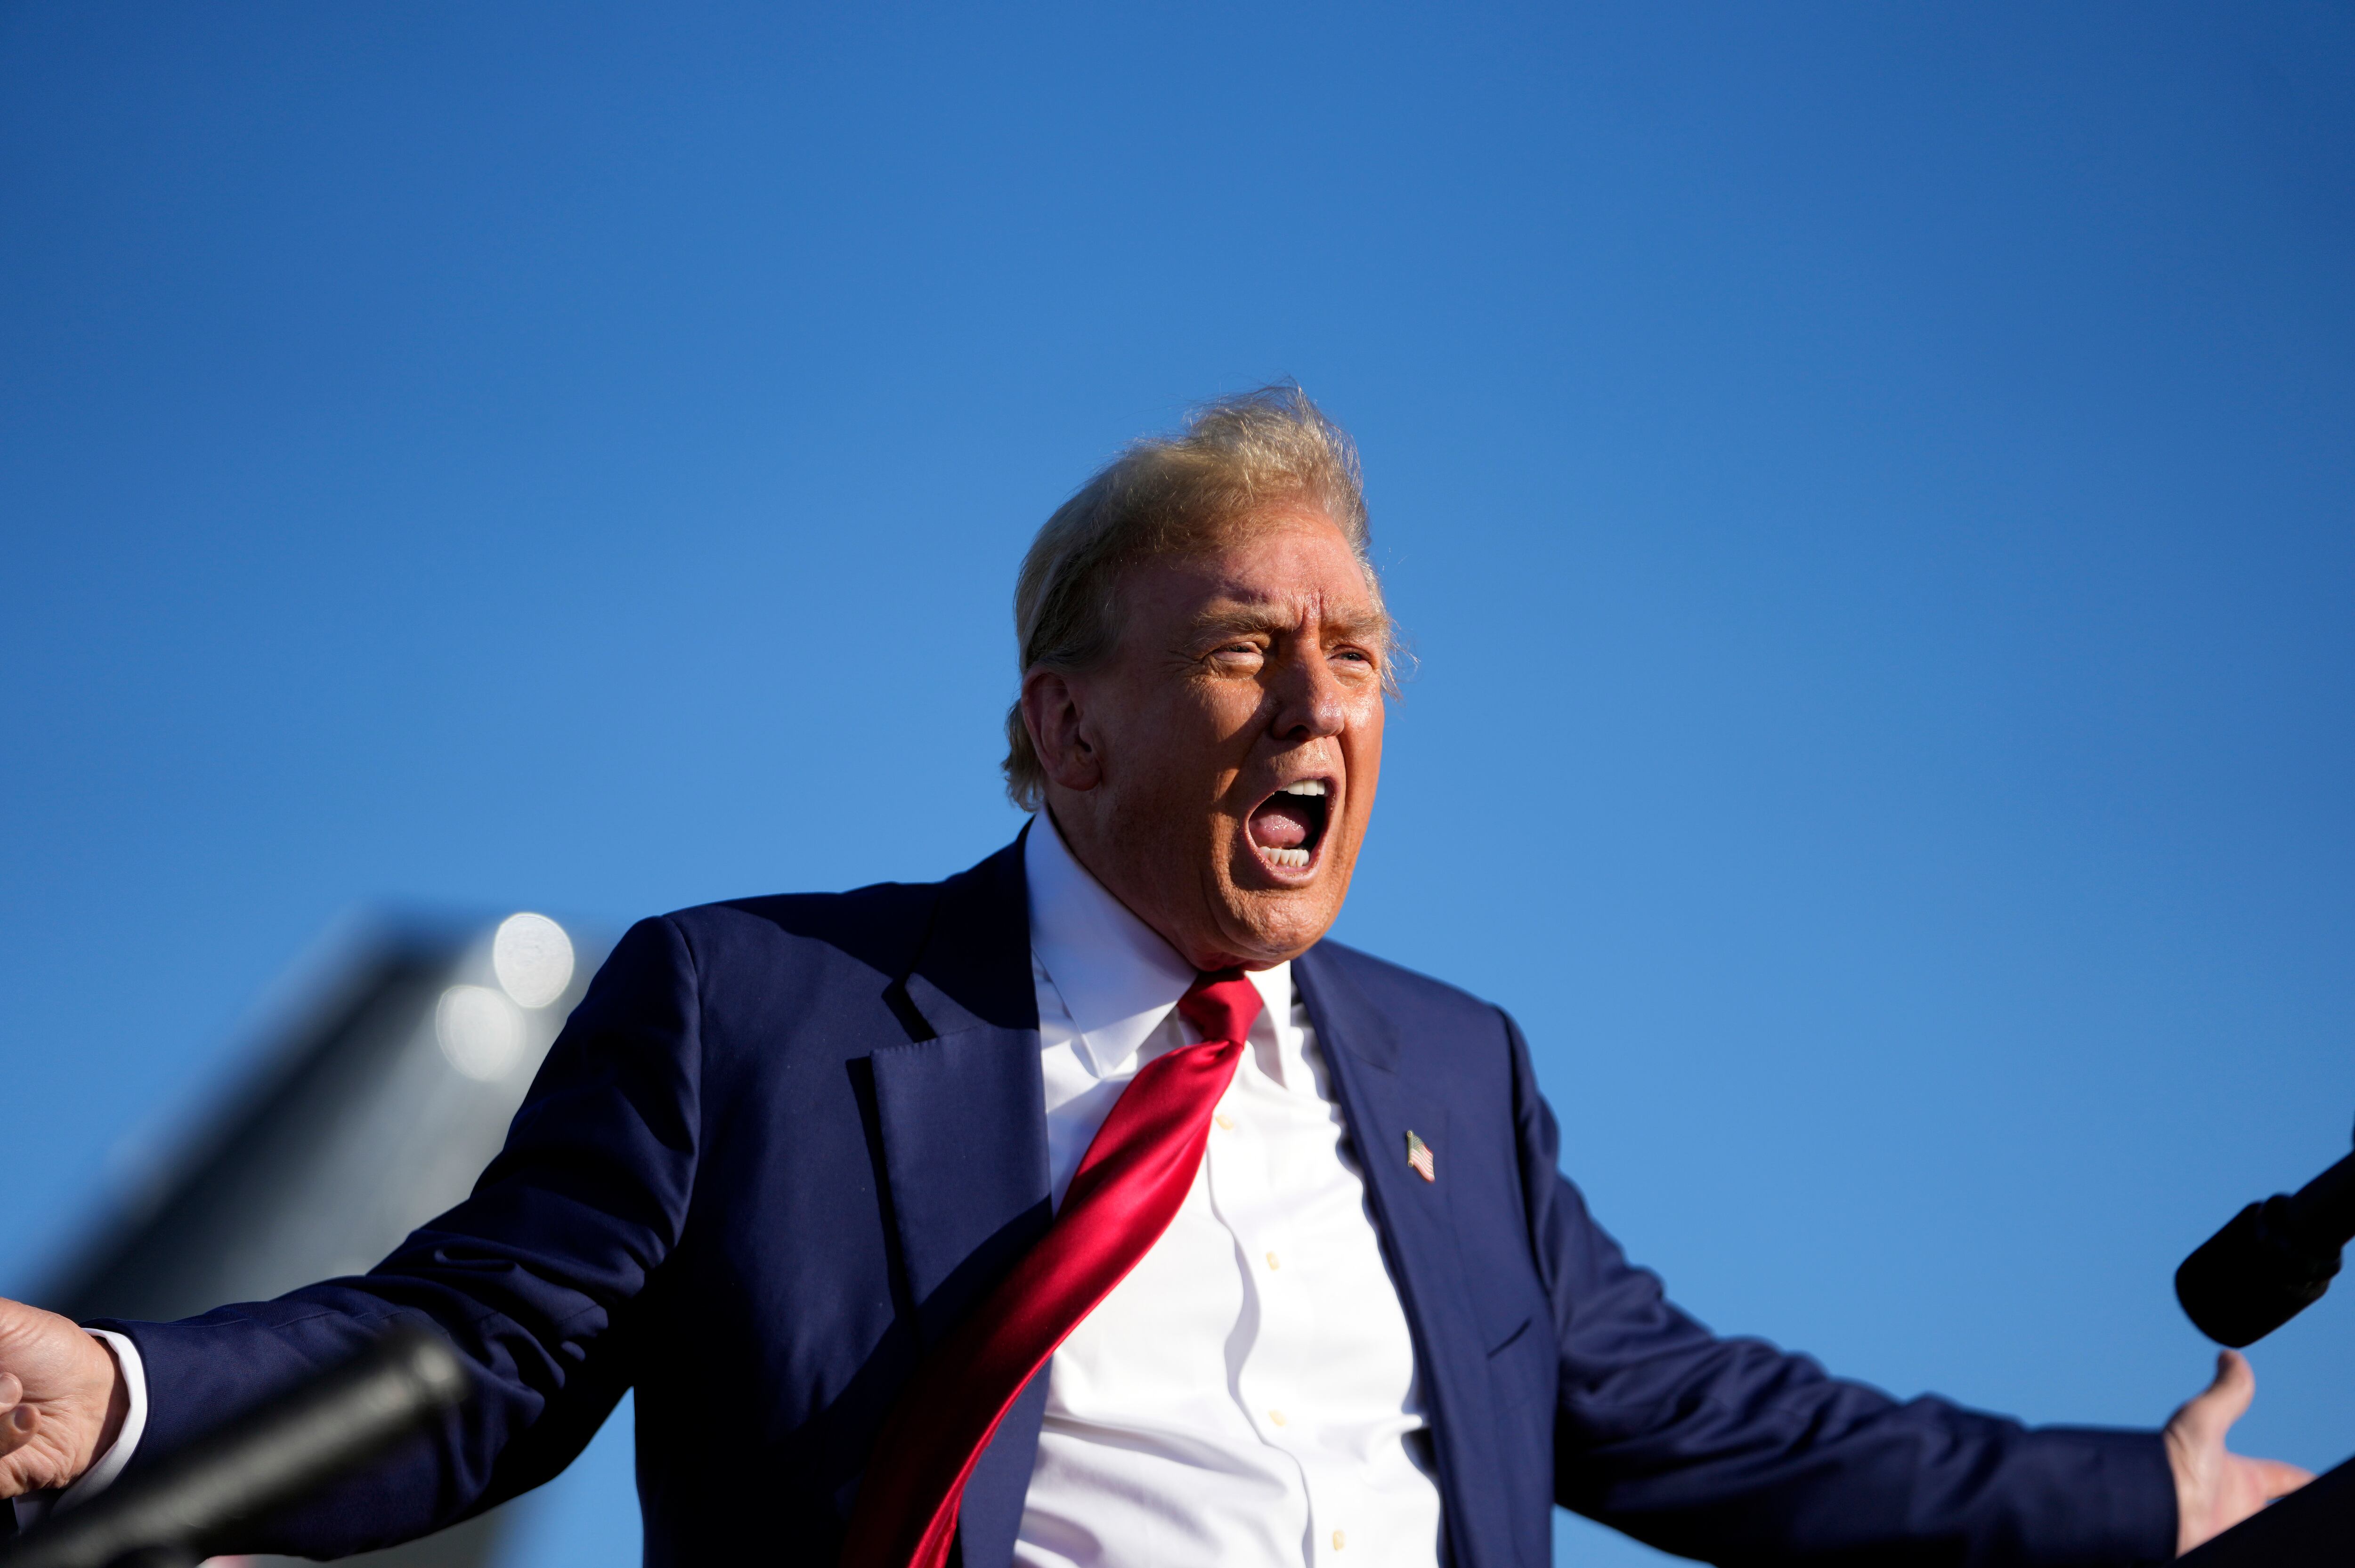 Republican presidential candidate former President Donald Trump speaks at a campaign rally in Freeland, Mich., on Wednesday. A pair of rallies in the pivotal states of Wisconsin and Michigan are his first campaign trail appearances since his trial in New York over alleged campaign finance violations started.